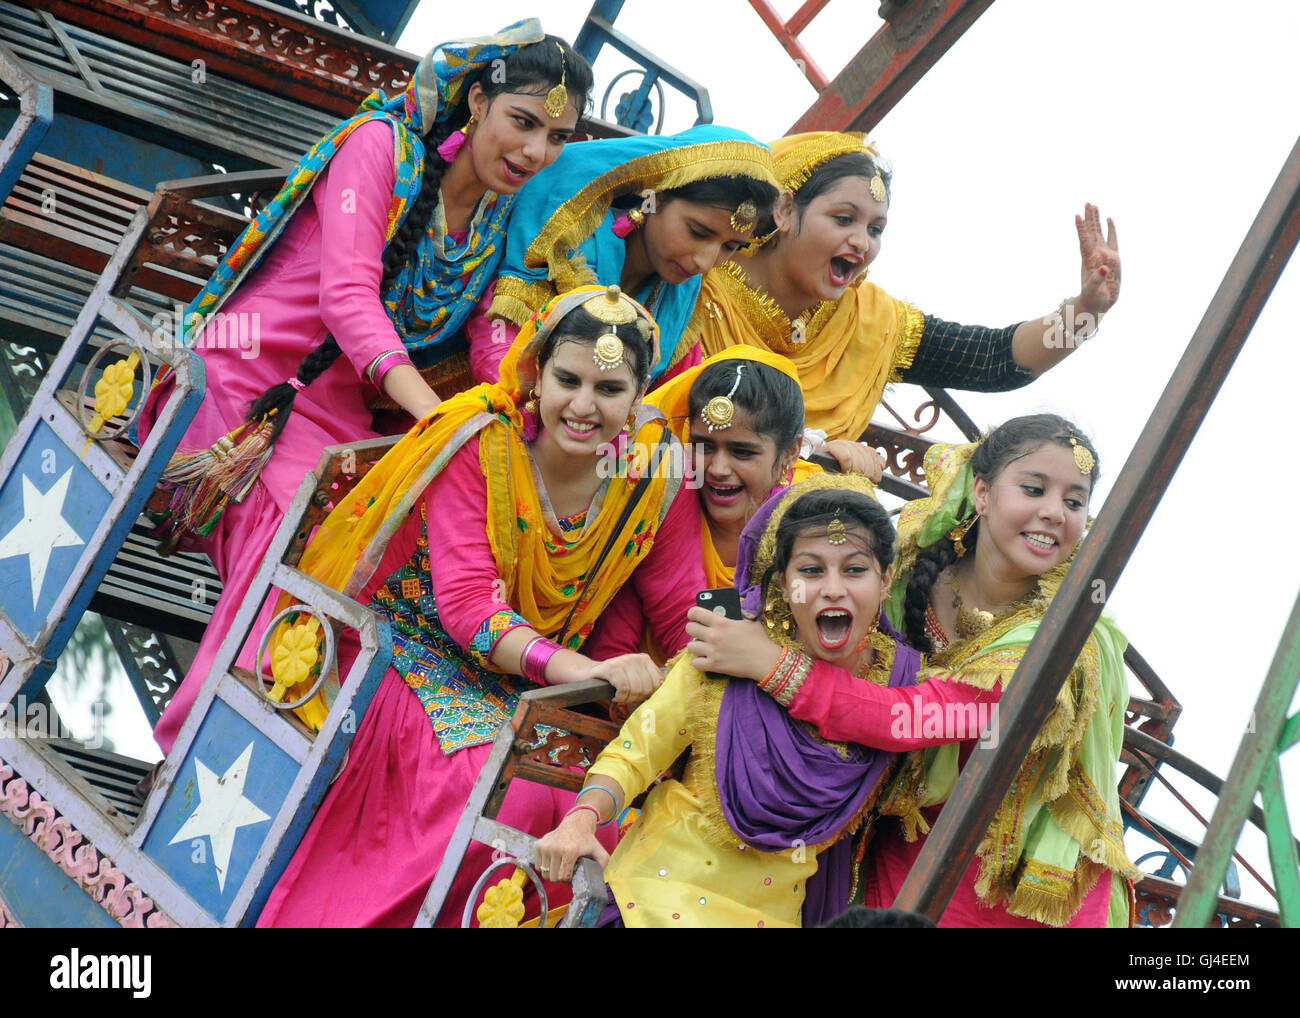 (160813) -- AMRITSAR (INDIA), Aug. 13, 2016 (Xinhua) -- College girls wearing traditional Punjabi dresses ride 'viking ship' during the celebration of Teej Festival in Amritsar, India, Aug. 13, 2016. Teej is a generic name for a number of festivals celebrated among females to welcome monsoon season in northern and western India and Nepal. (xinhua/stringer) (wtc) Stock Photo